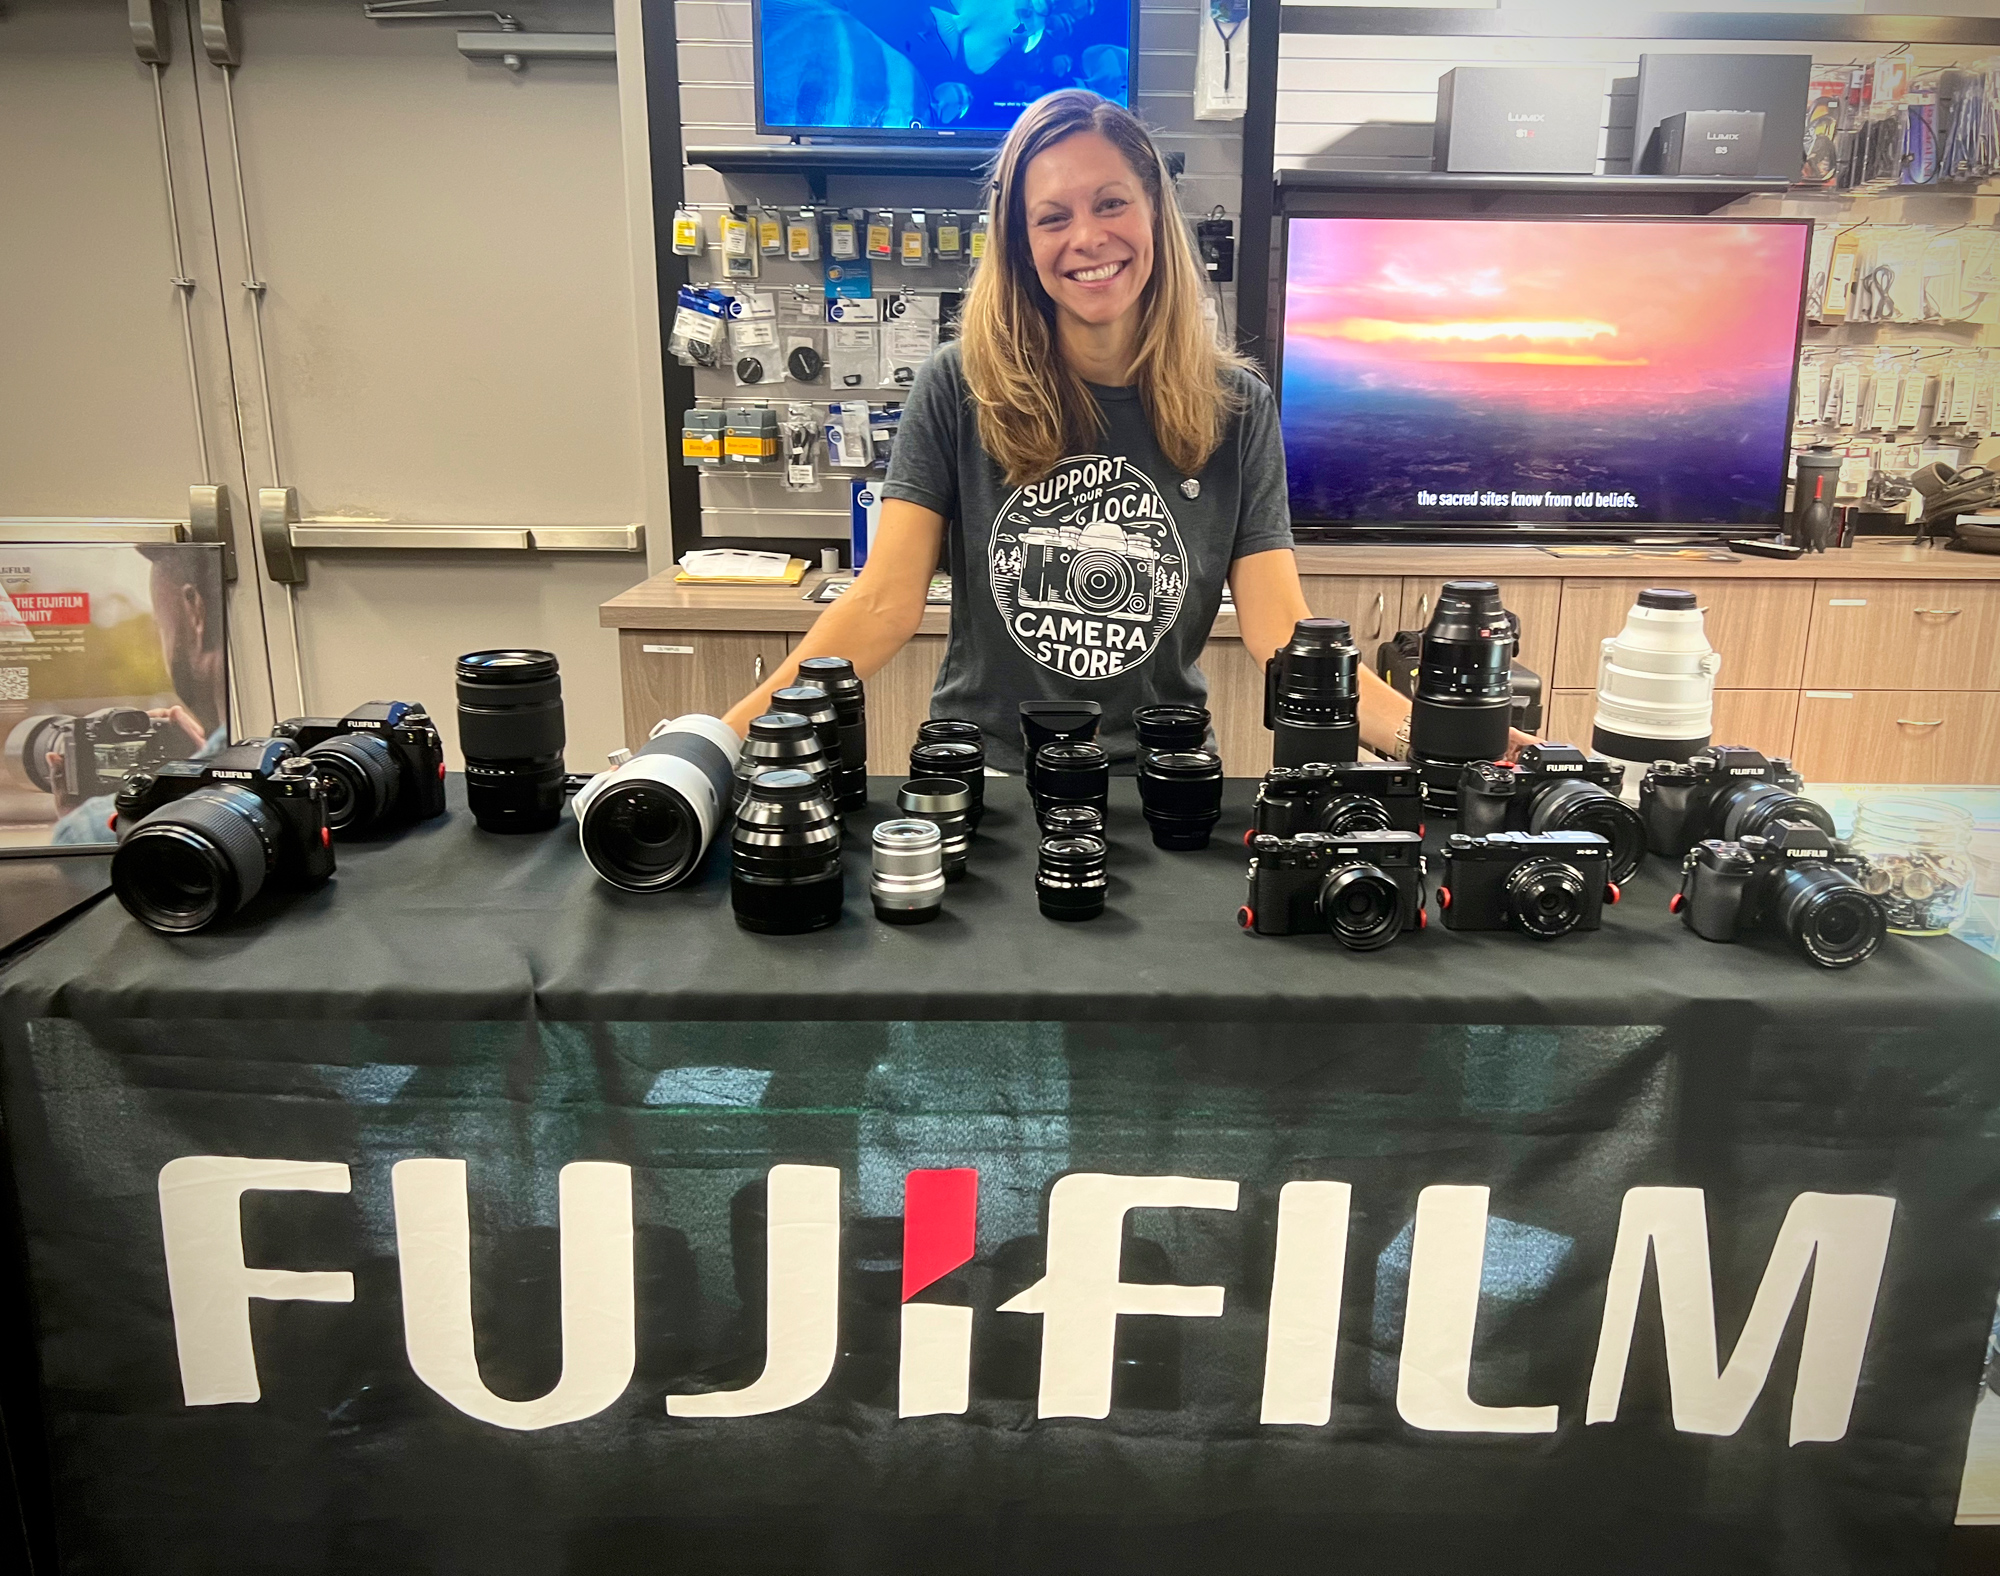 Meredith Reinker helped out at the Fuji display 